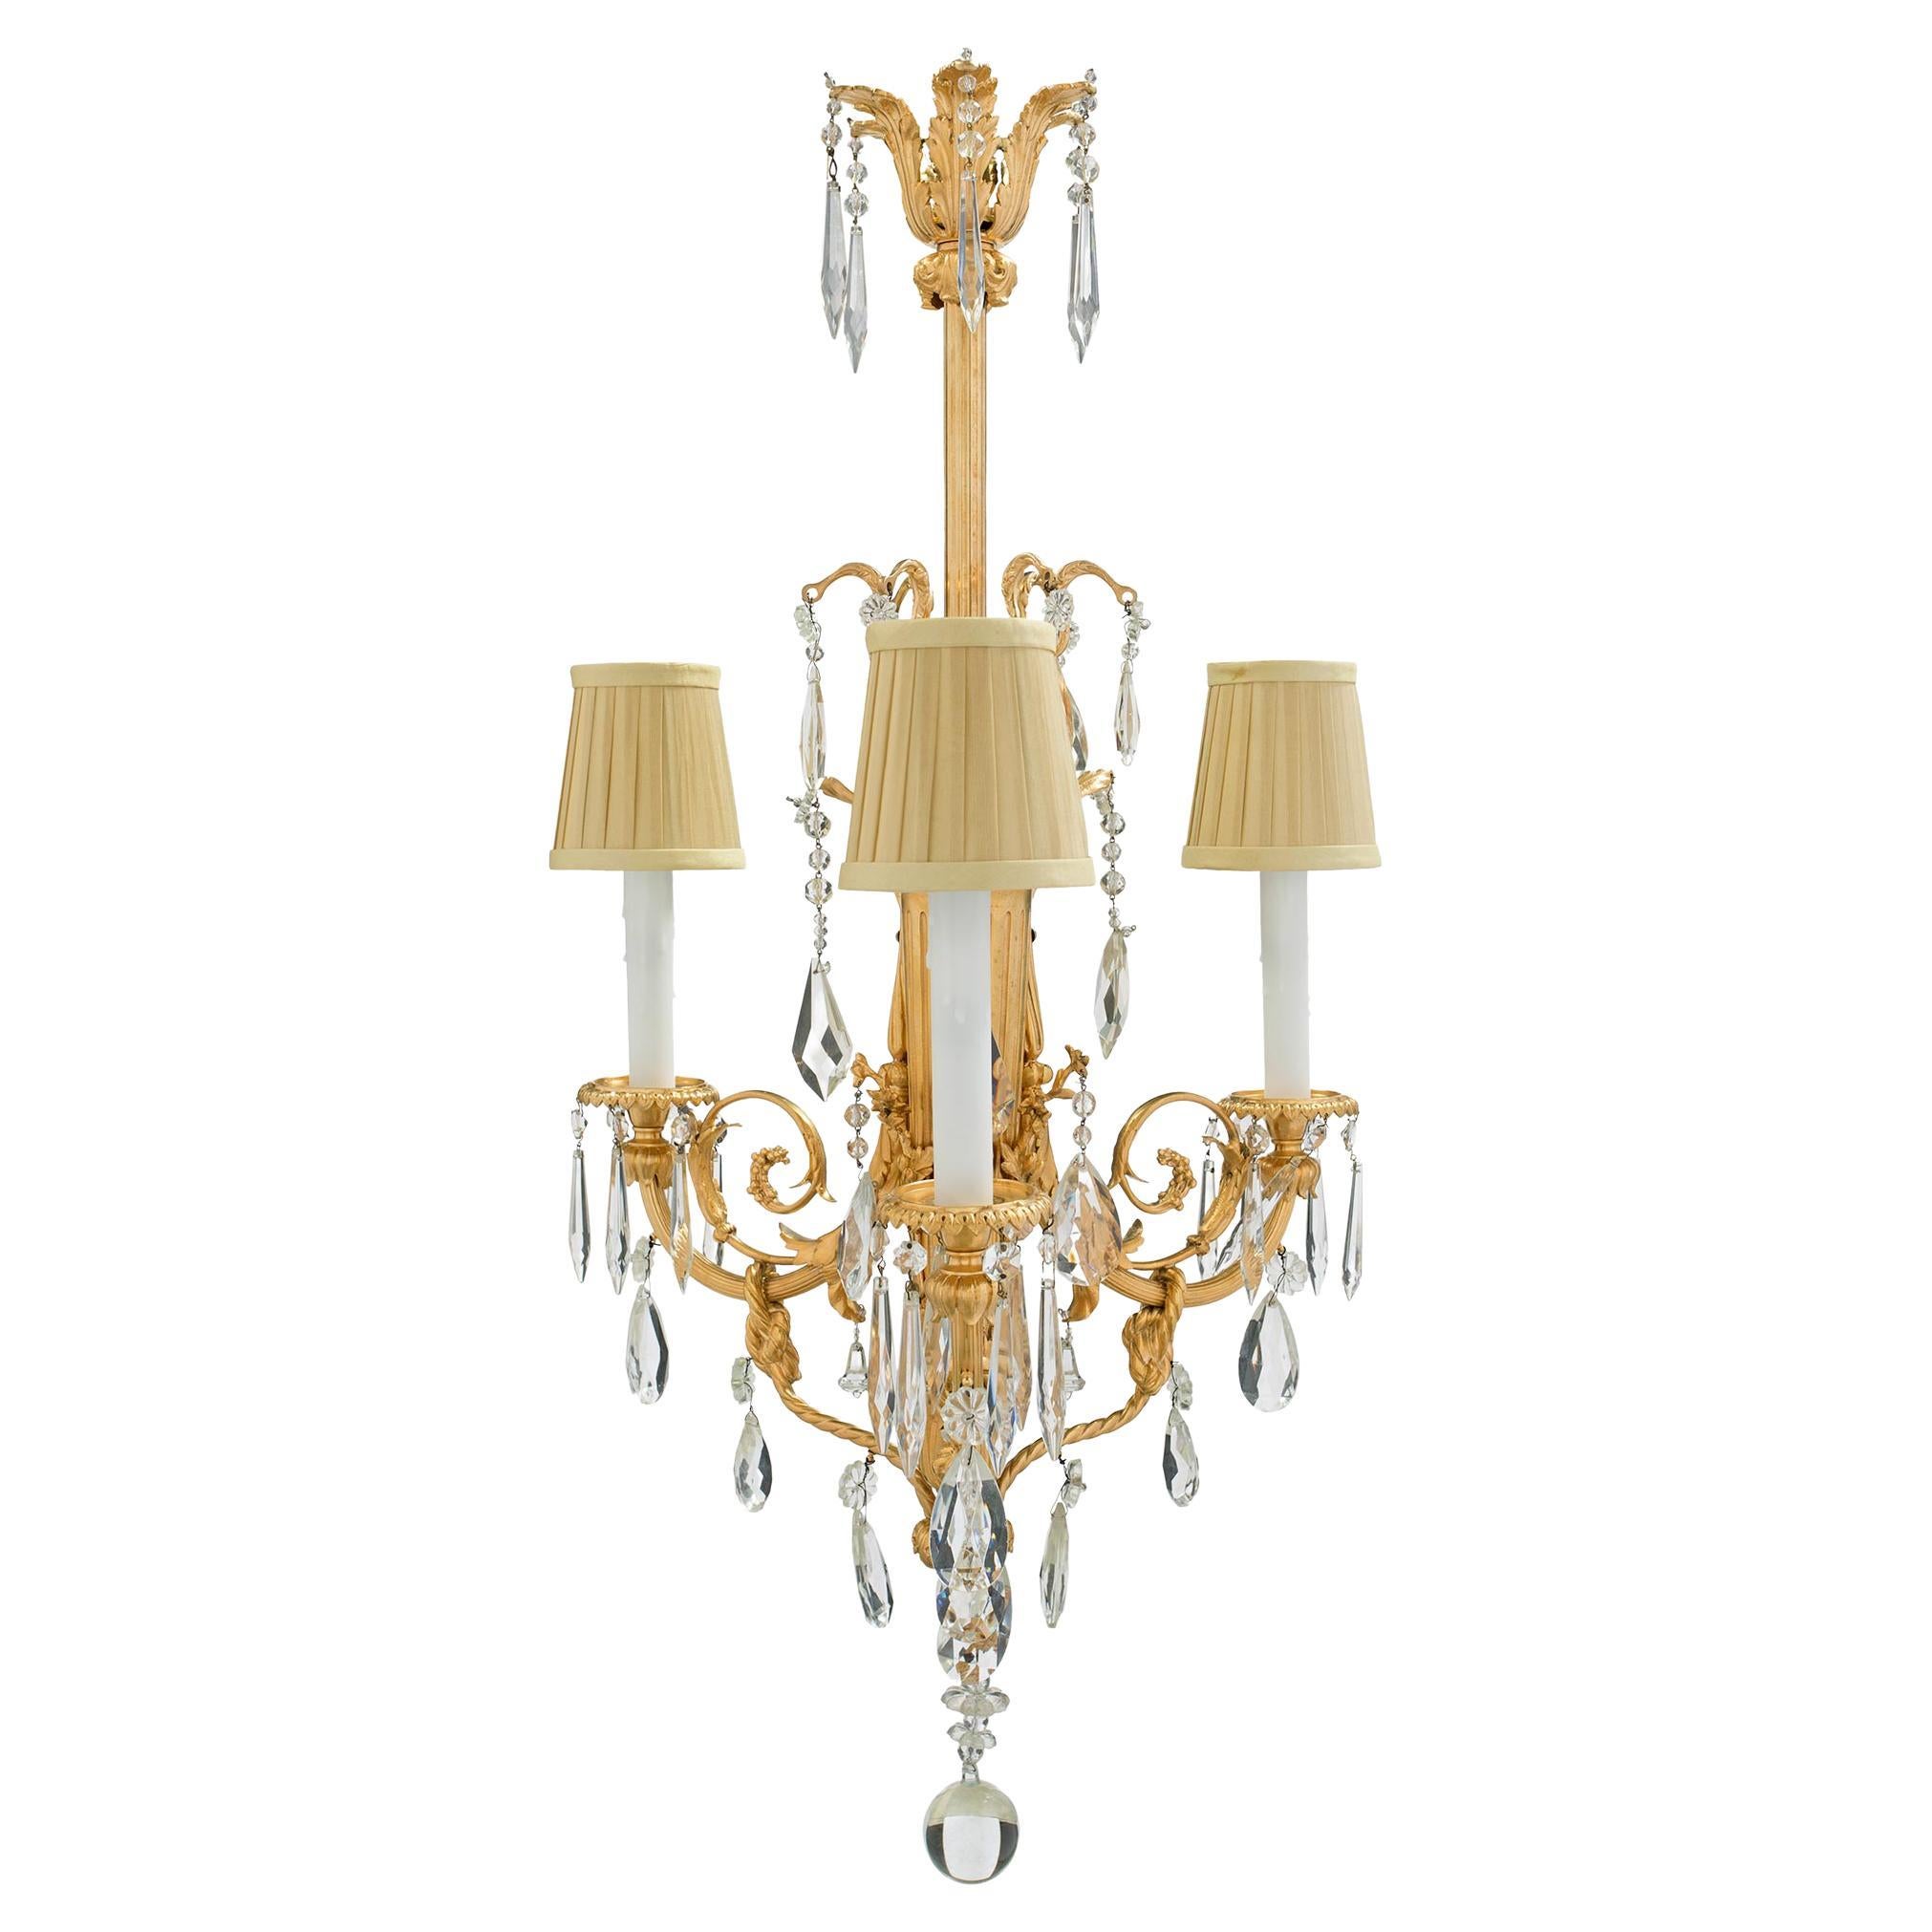 French 19th Century Louis XVI Style Baccarat Crystal and Ormolu Chandelier For Sale